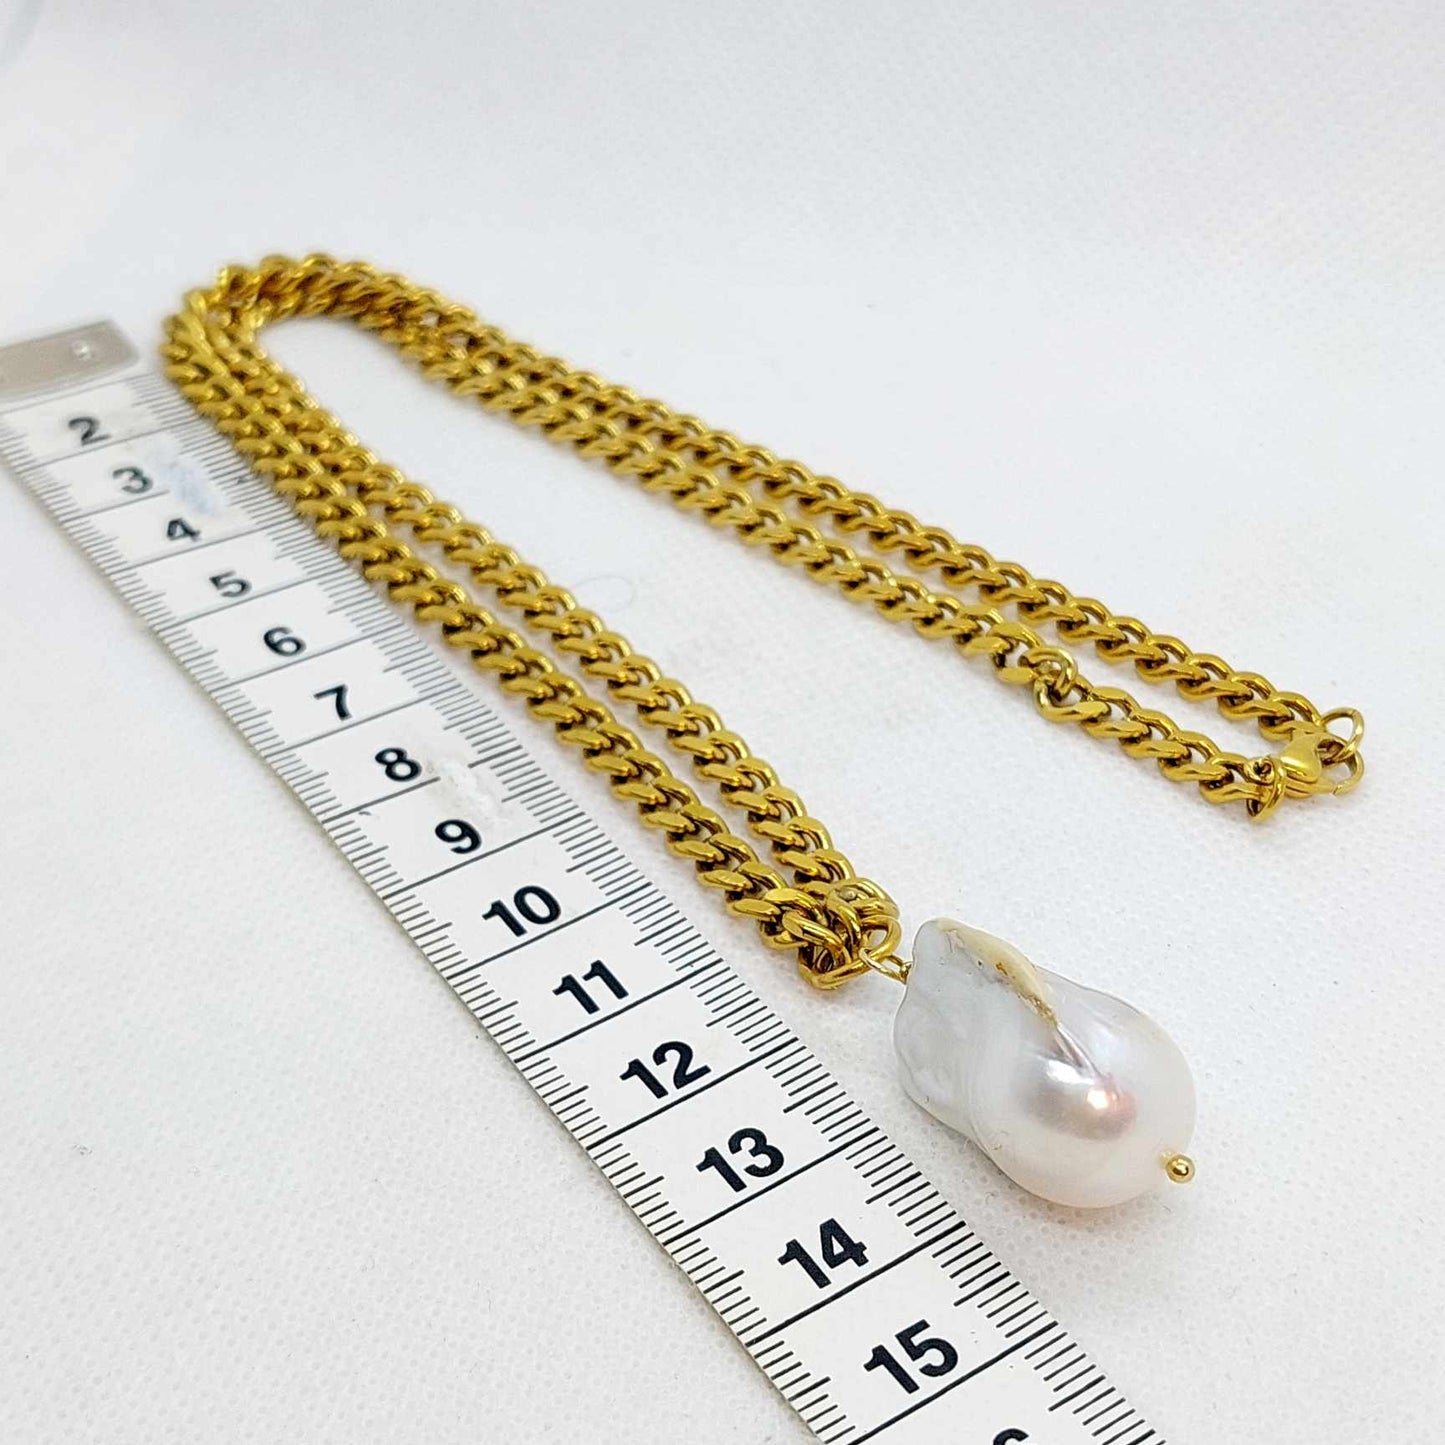 Natural Large Baroque Pearl Pendant in Gold Plated Stainless Steel